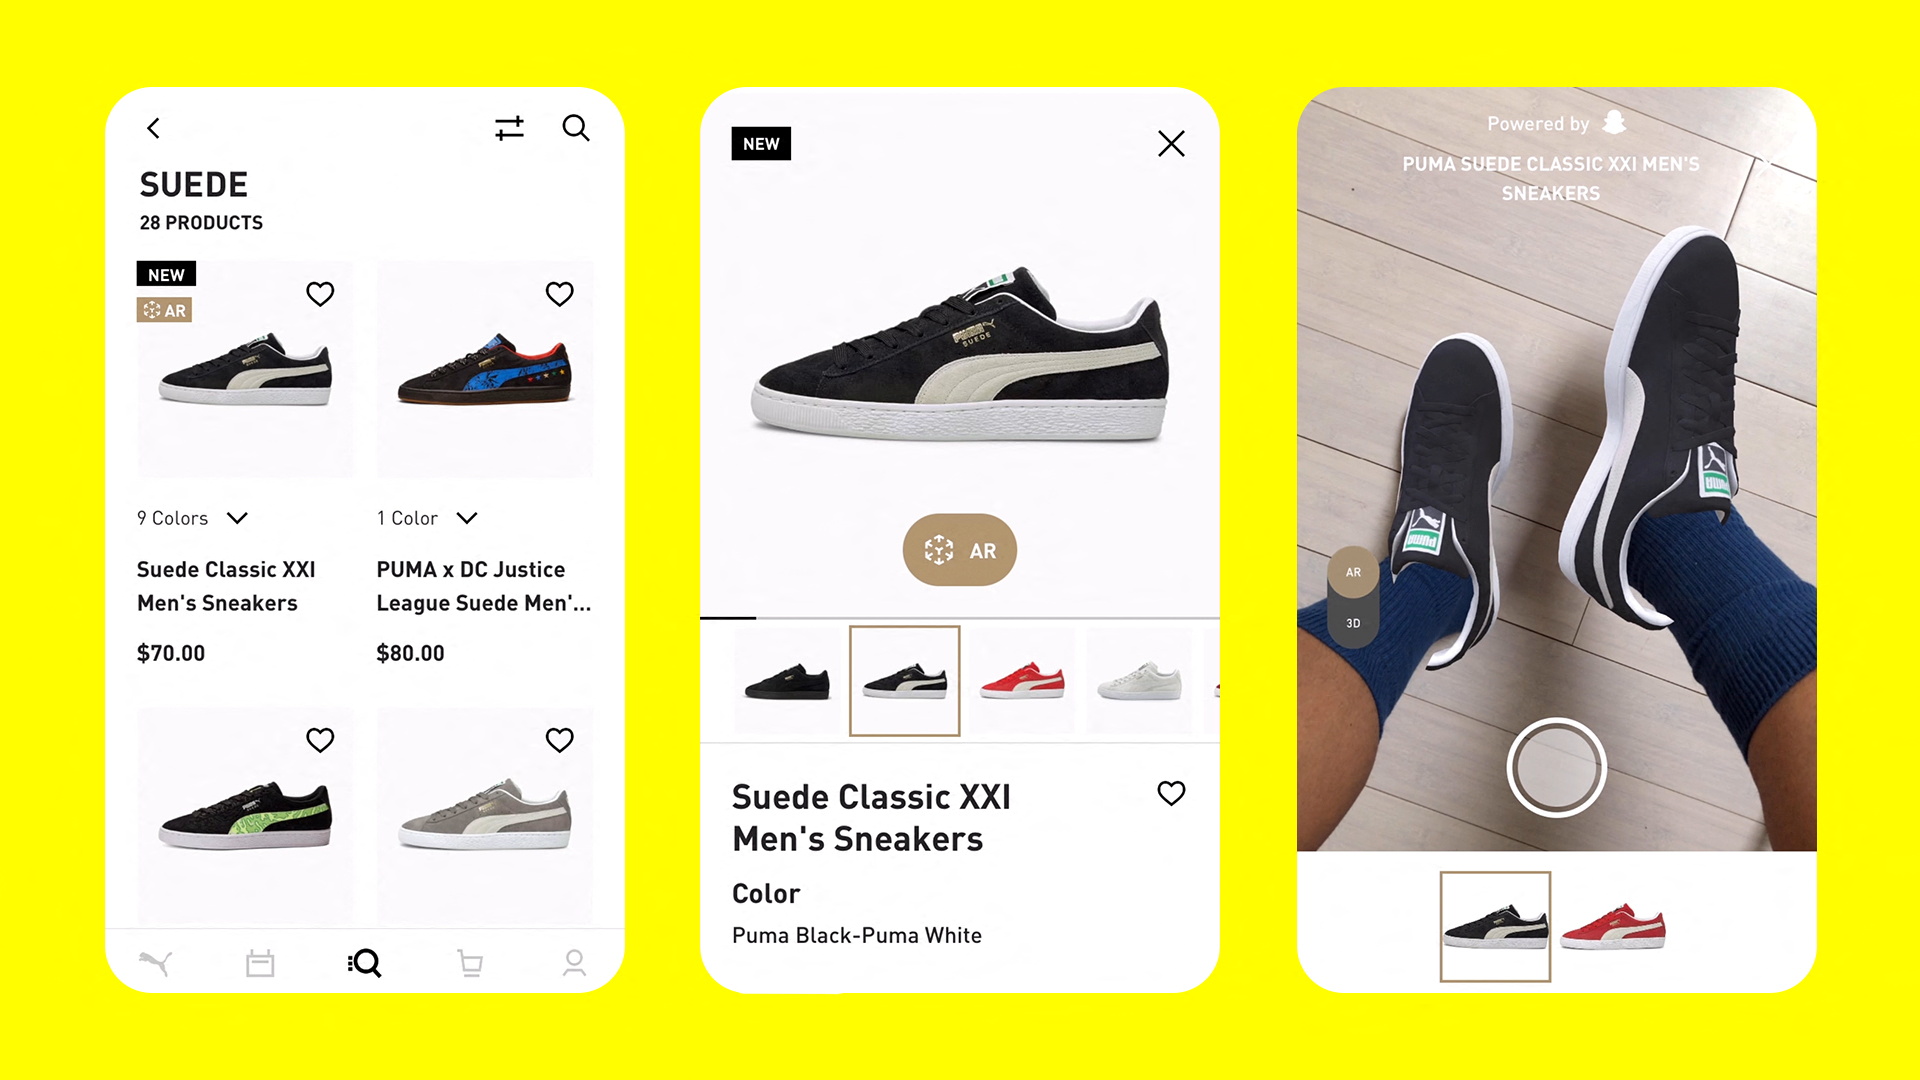 Augmented reality shopping experience is shown on the Snapchat app